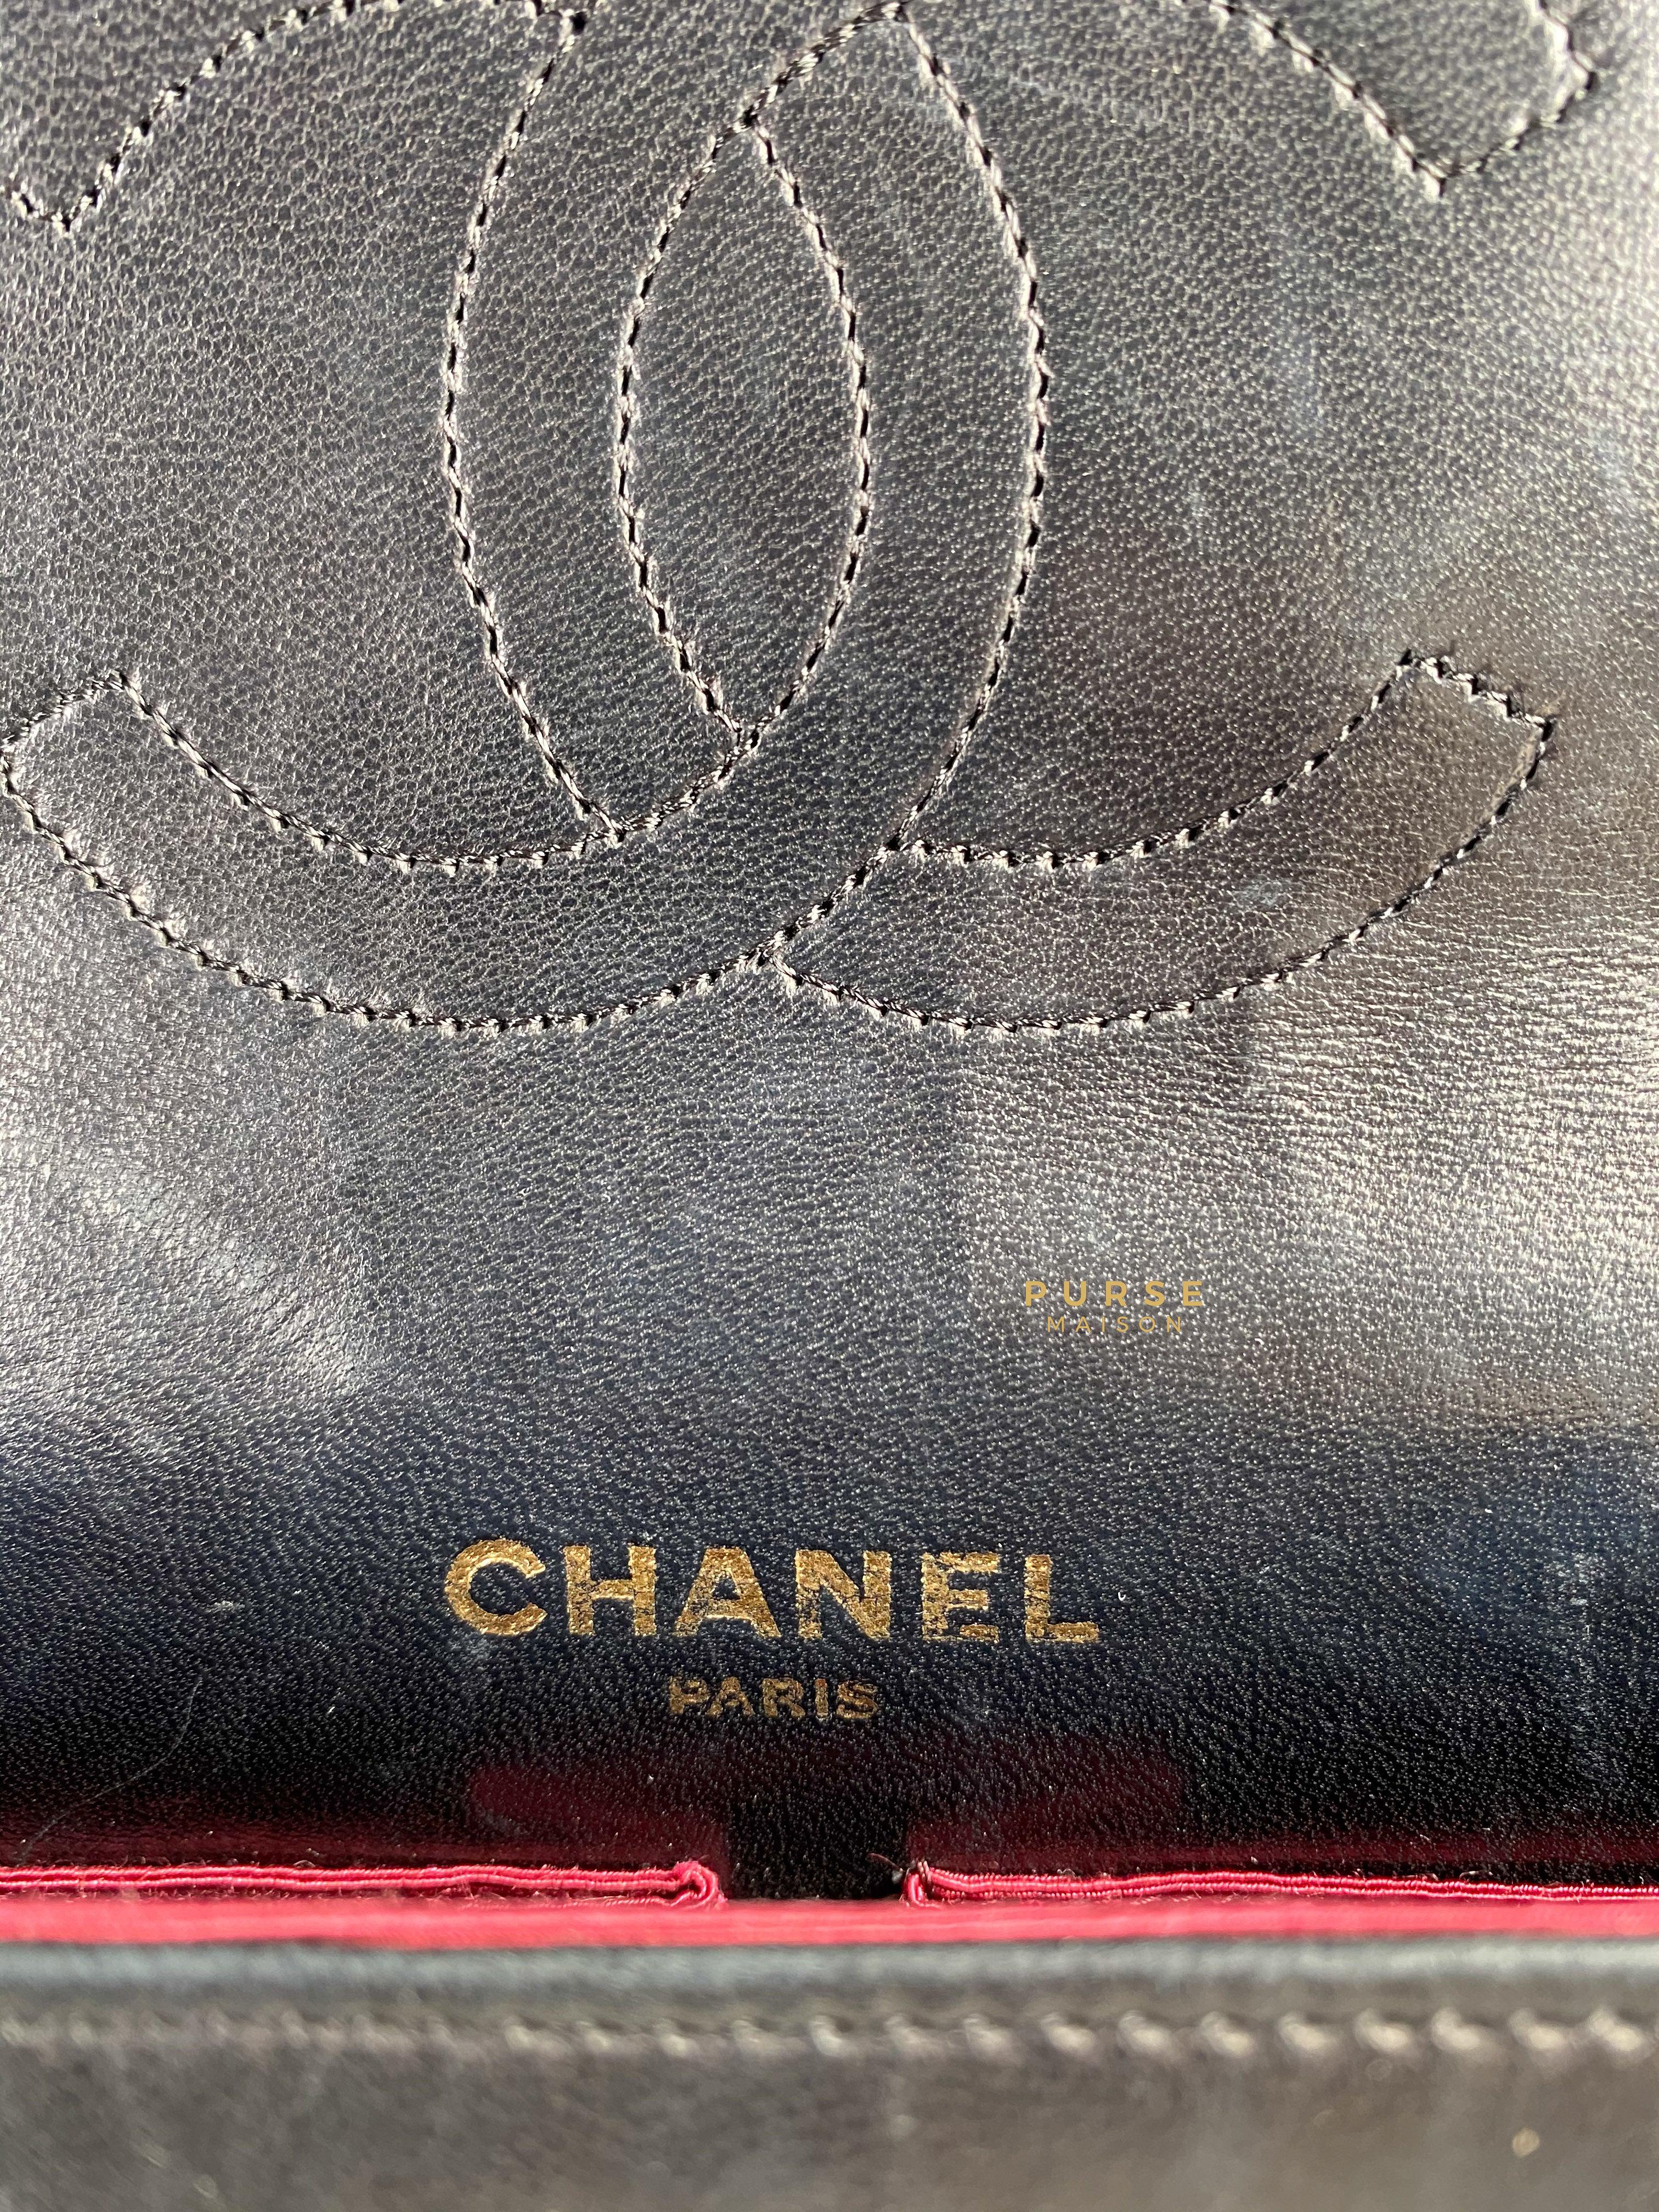 Chanel Vintage Medium Classic Flap in Lambskin Bijoux Chain and 24k Gold Hardware Pre Series 0 | Purse Maison Luxury Bags Shop